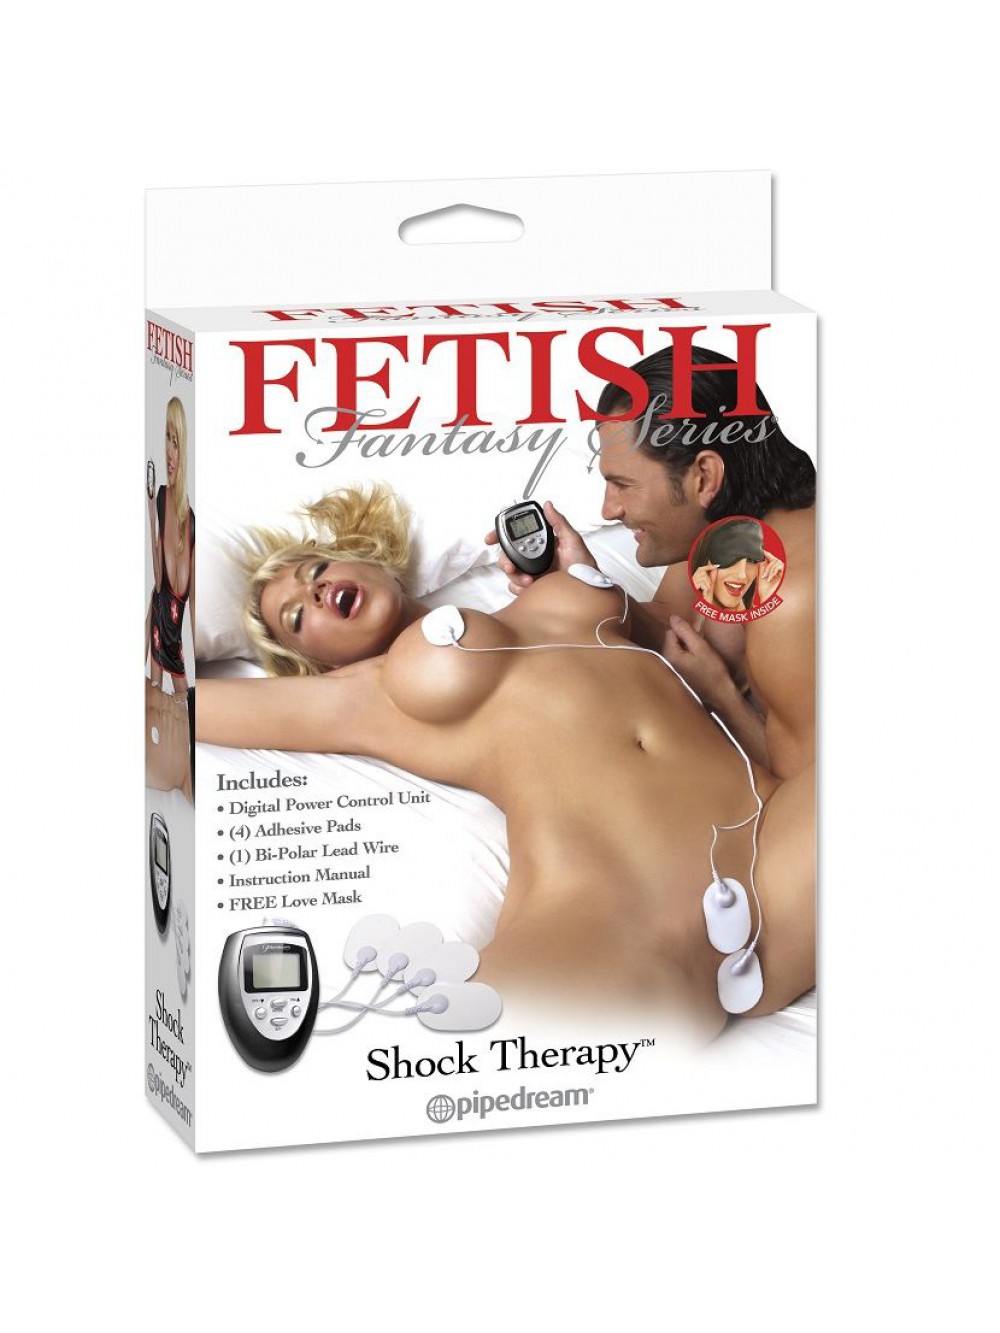 SHOCK THERAPY KIT